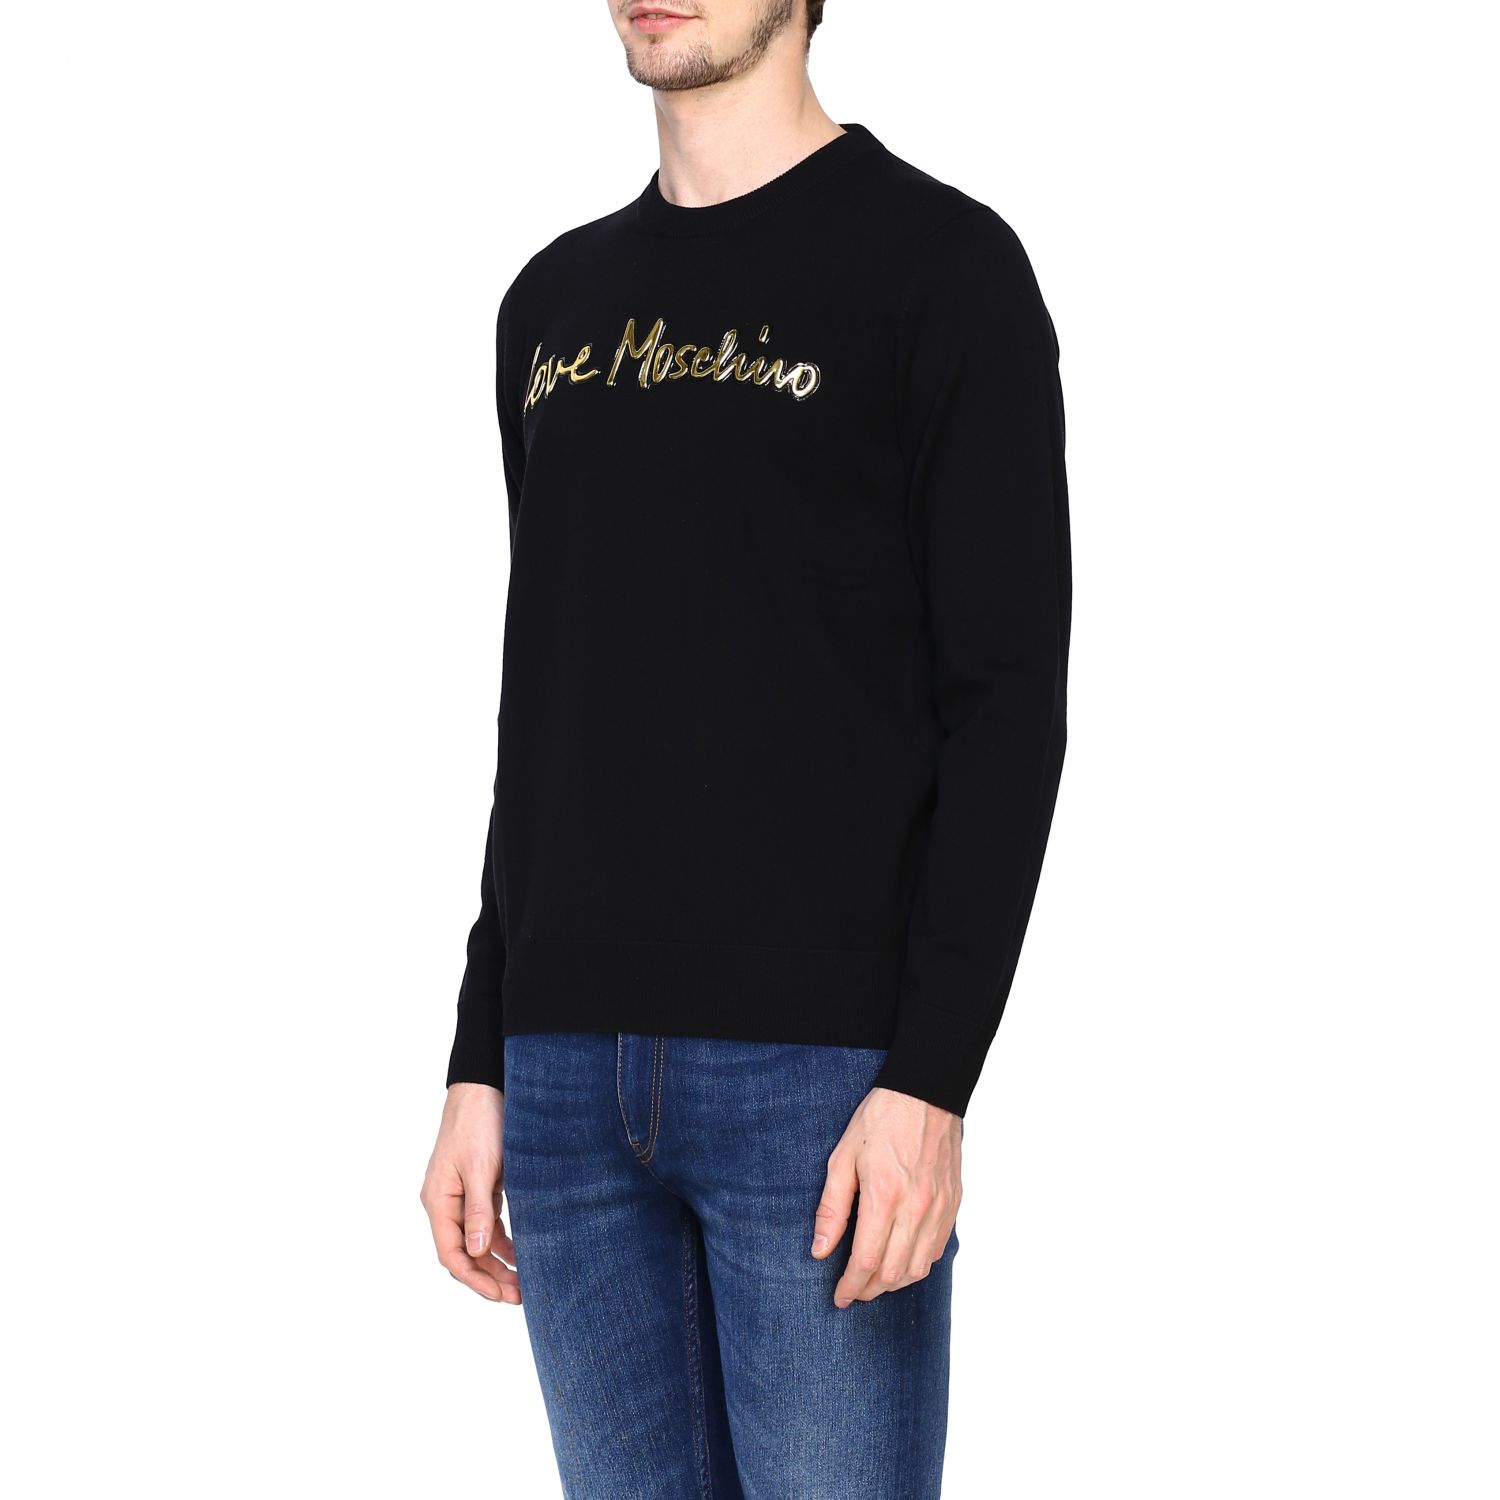 Love Moschino Outlet: jumper for men - Black | Love Moschino jumper ...